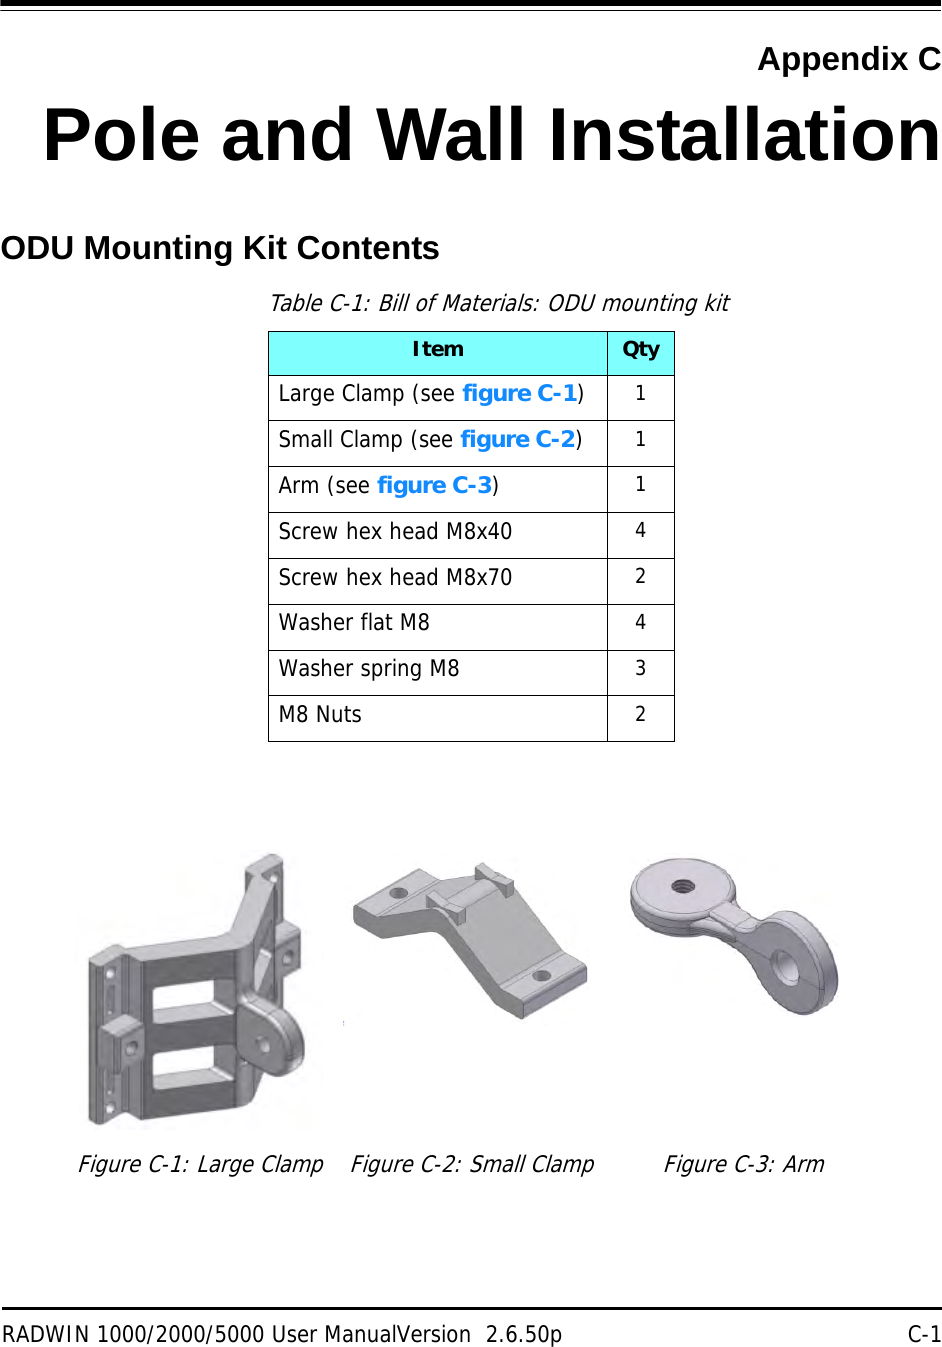 RADWIN 1000/2000/5000 User ManualVersion  2.6.50p C-1Appendix CPole and Wall InstallationODU Mounting Kit ContentsTable C-1: Bill of Materials: ODU mounting kitItem QtyLarge Clamp (see figure C-1)1Small Clamp (see figure C-2)1Arm (see figure C-3)1Screw hex head M8x40 4Screw hex head M8x70 2Washer flat M8 4Washer spring M8 3M8 Nuts 2Figure C-1: Large Clamp Figure C-2: Small Clamp Figure C-3: Arm